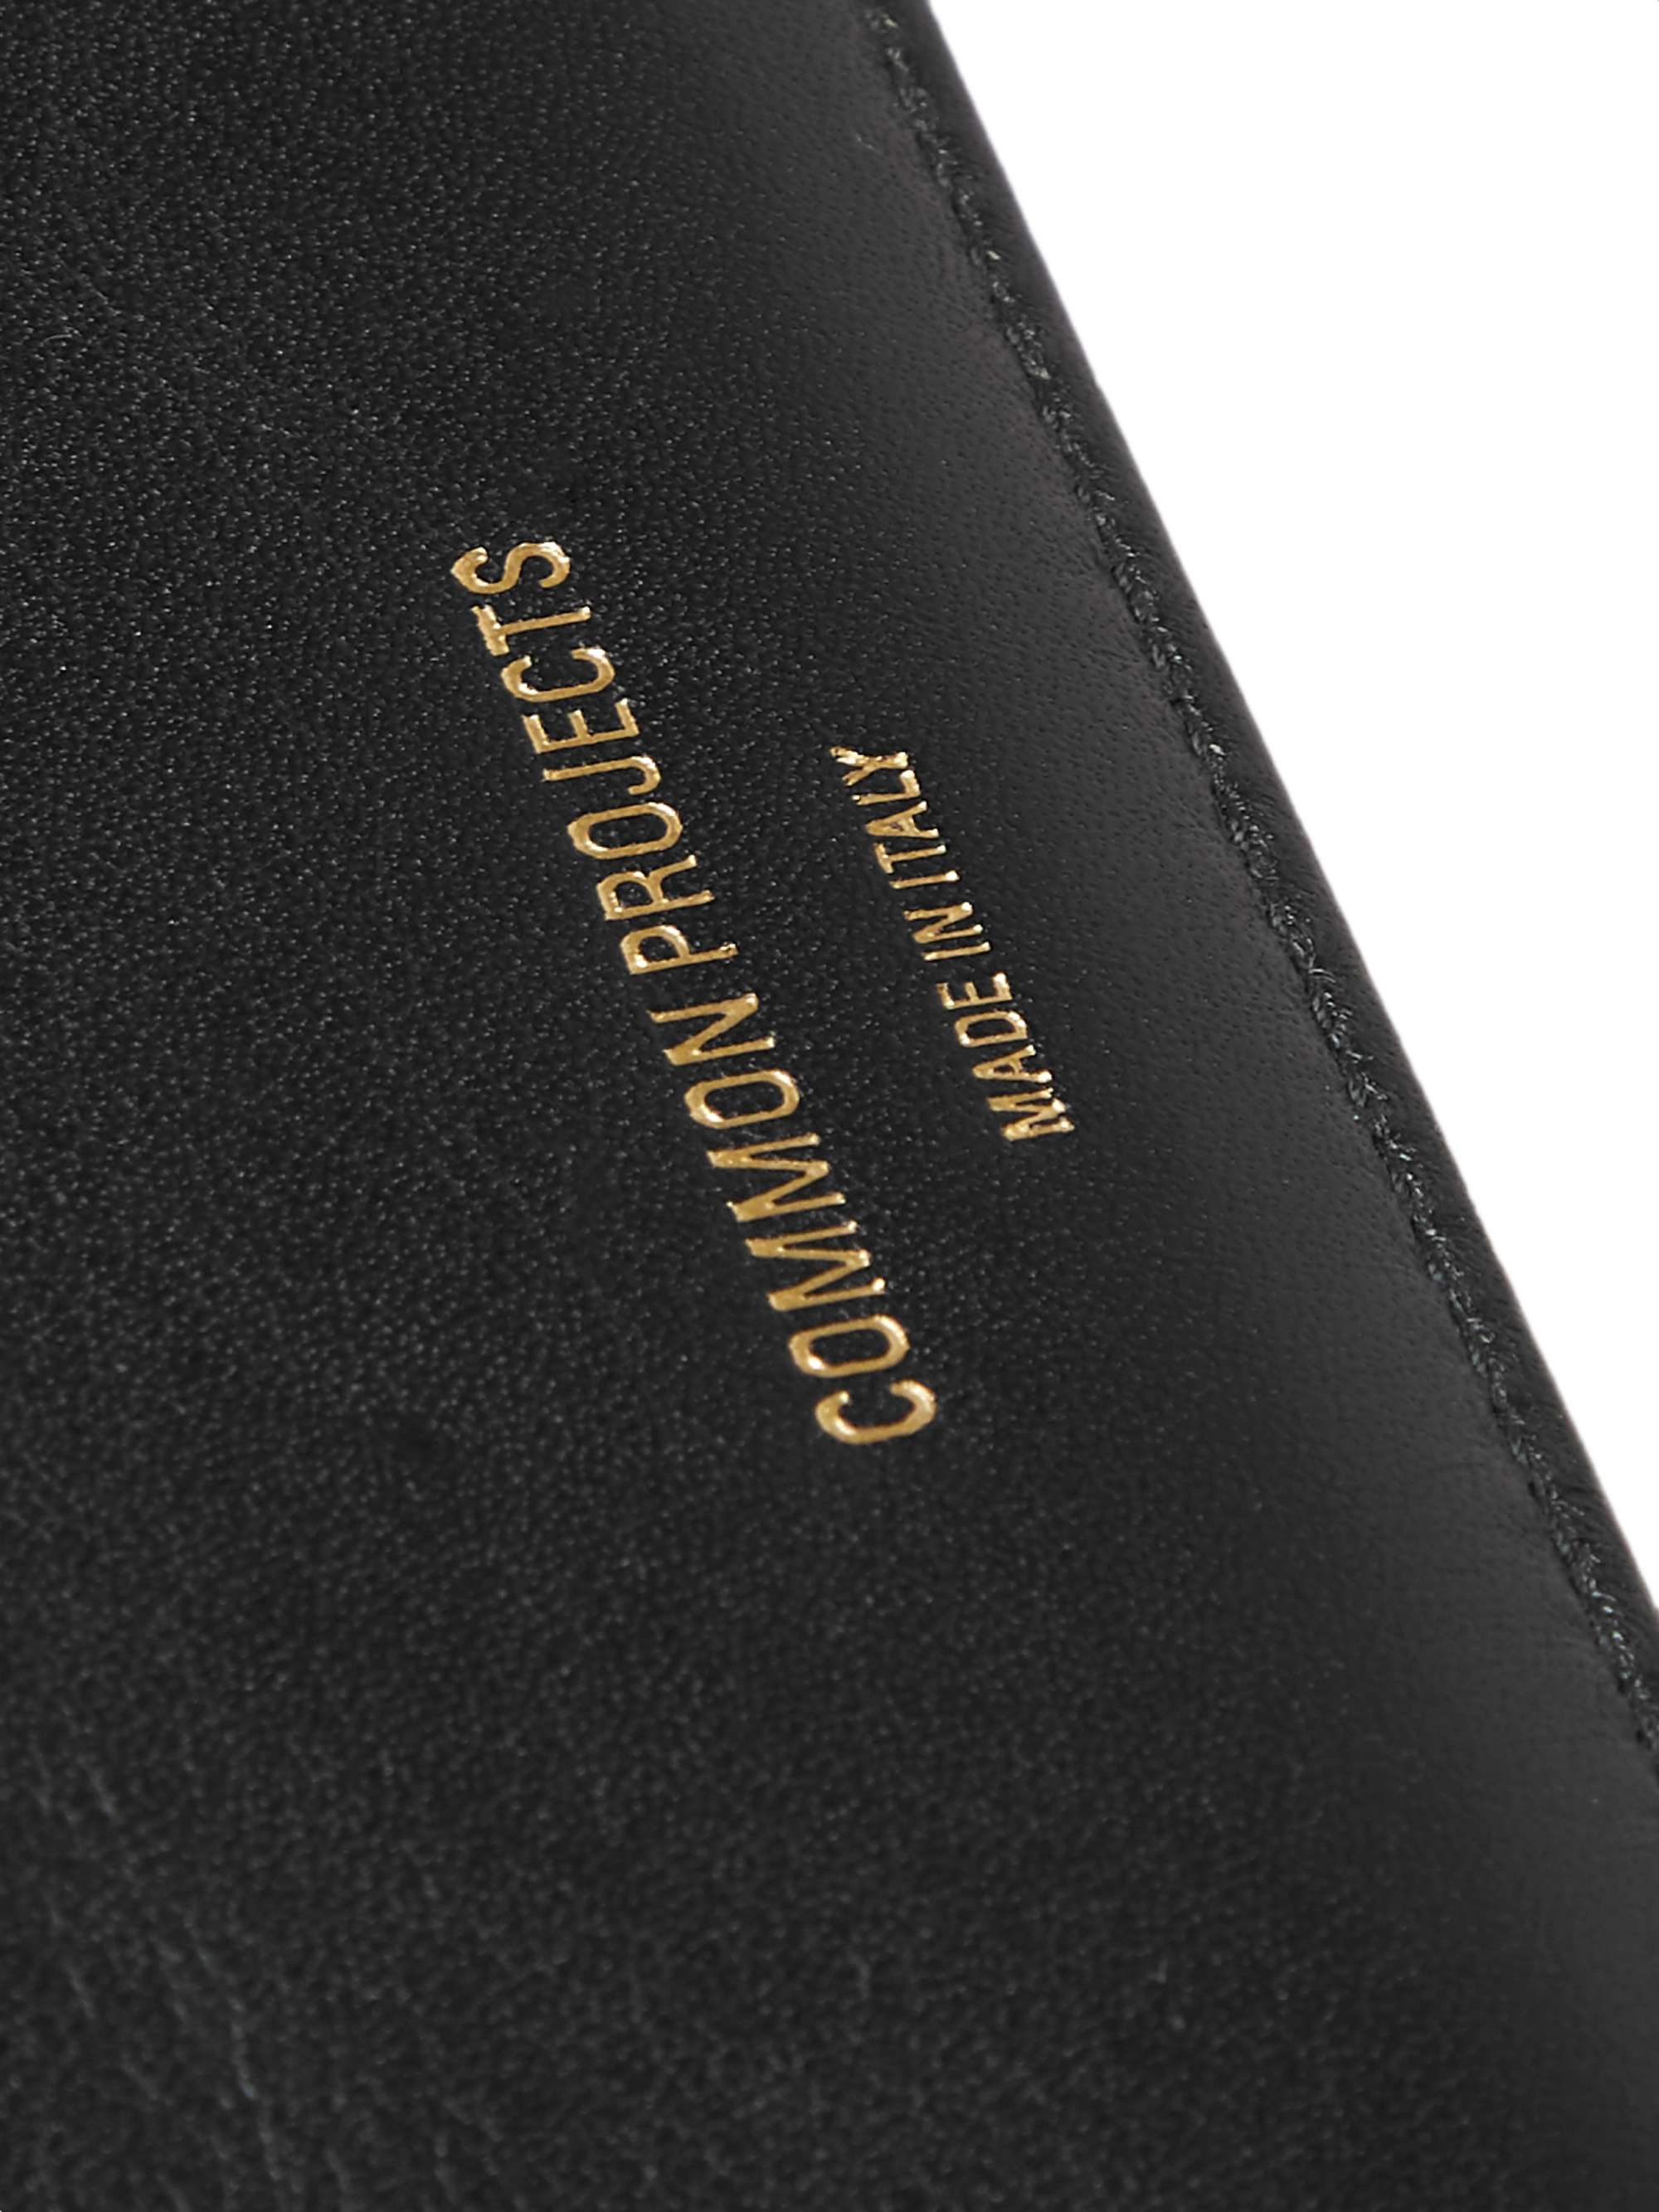 COMMON PROJECTS Textured-Leather Cardholder